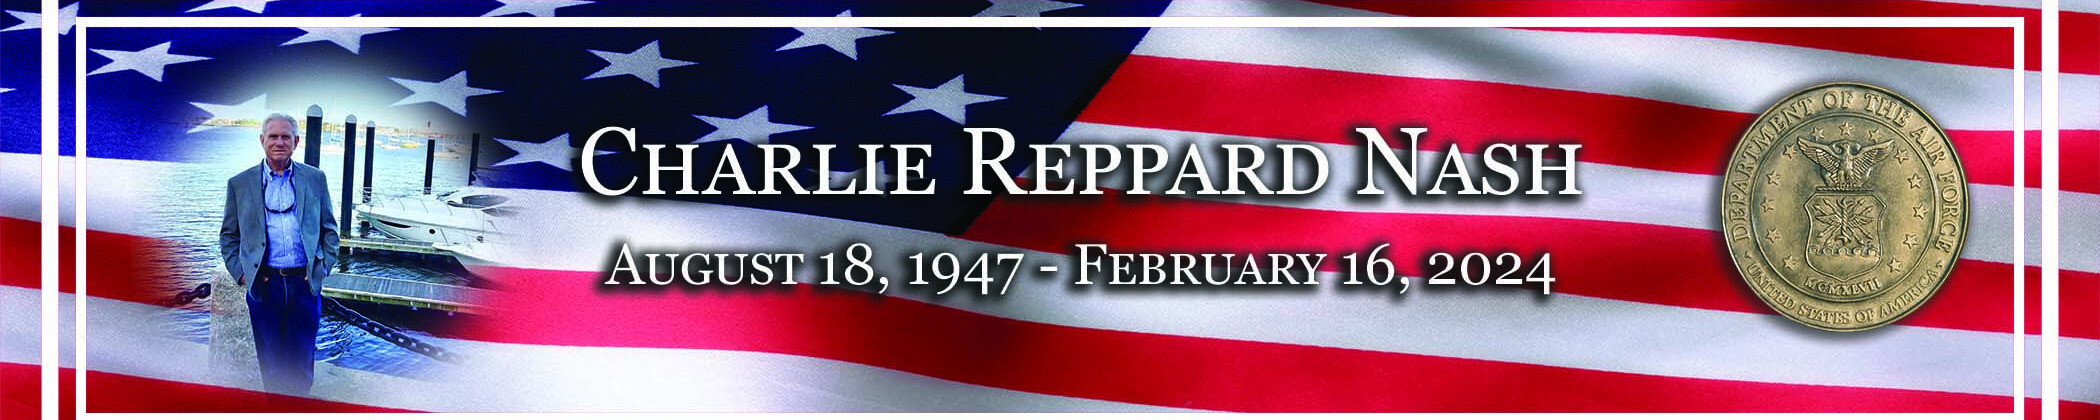 Cover photo for Charlie Reppard "Rep" Nash's Obituary